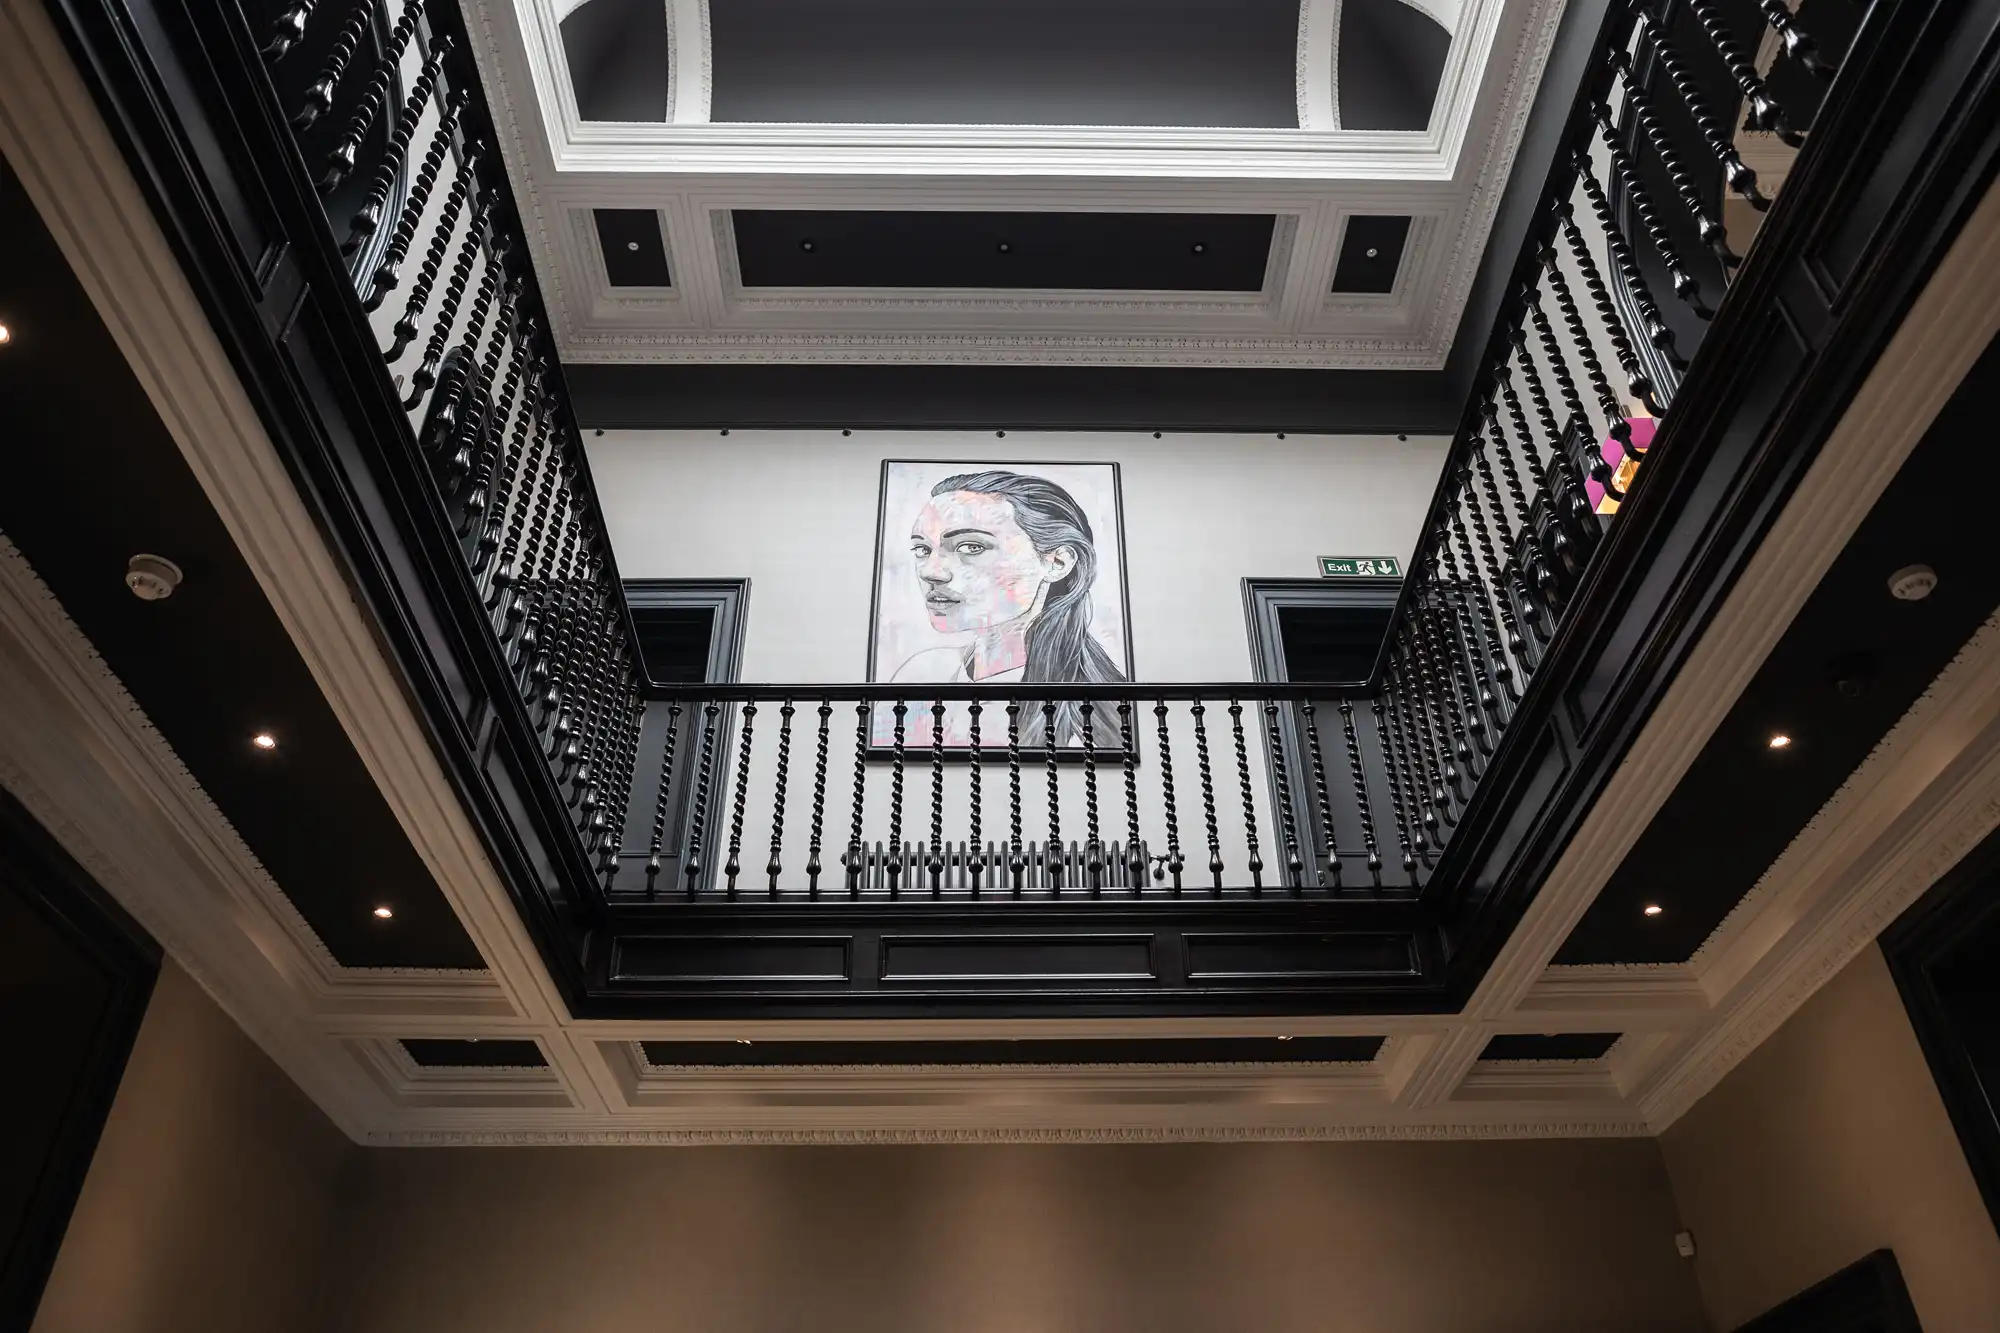 A square stairwell with ornate black railings and a large portrait of a person on the wall between the second and third floors. The ceiling above has recessed lighting.